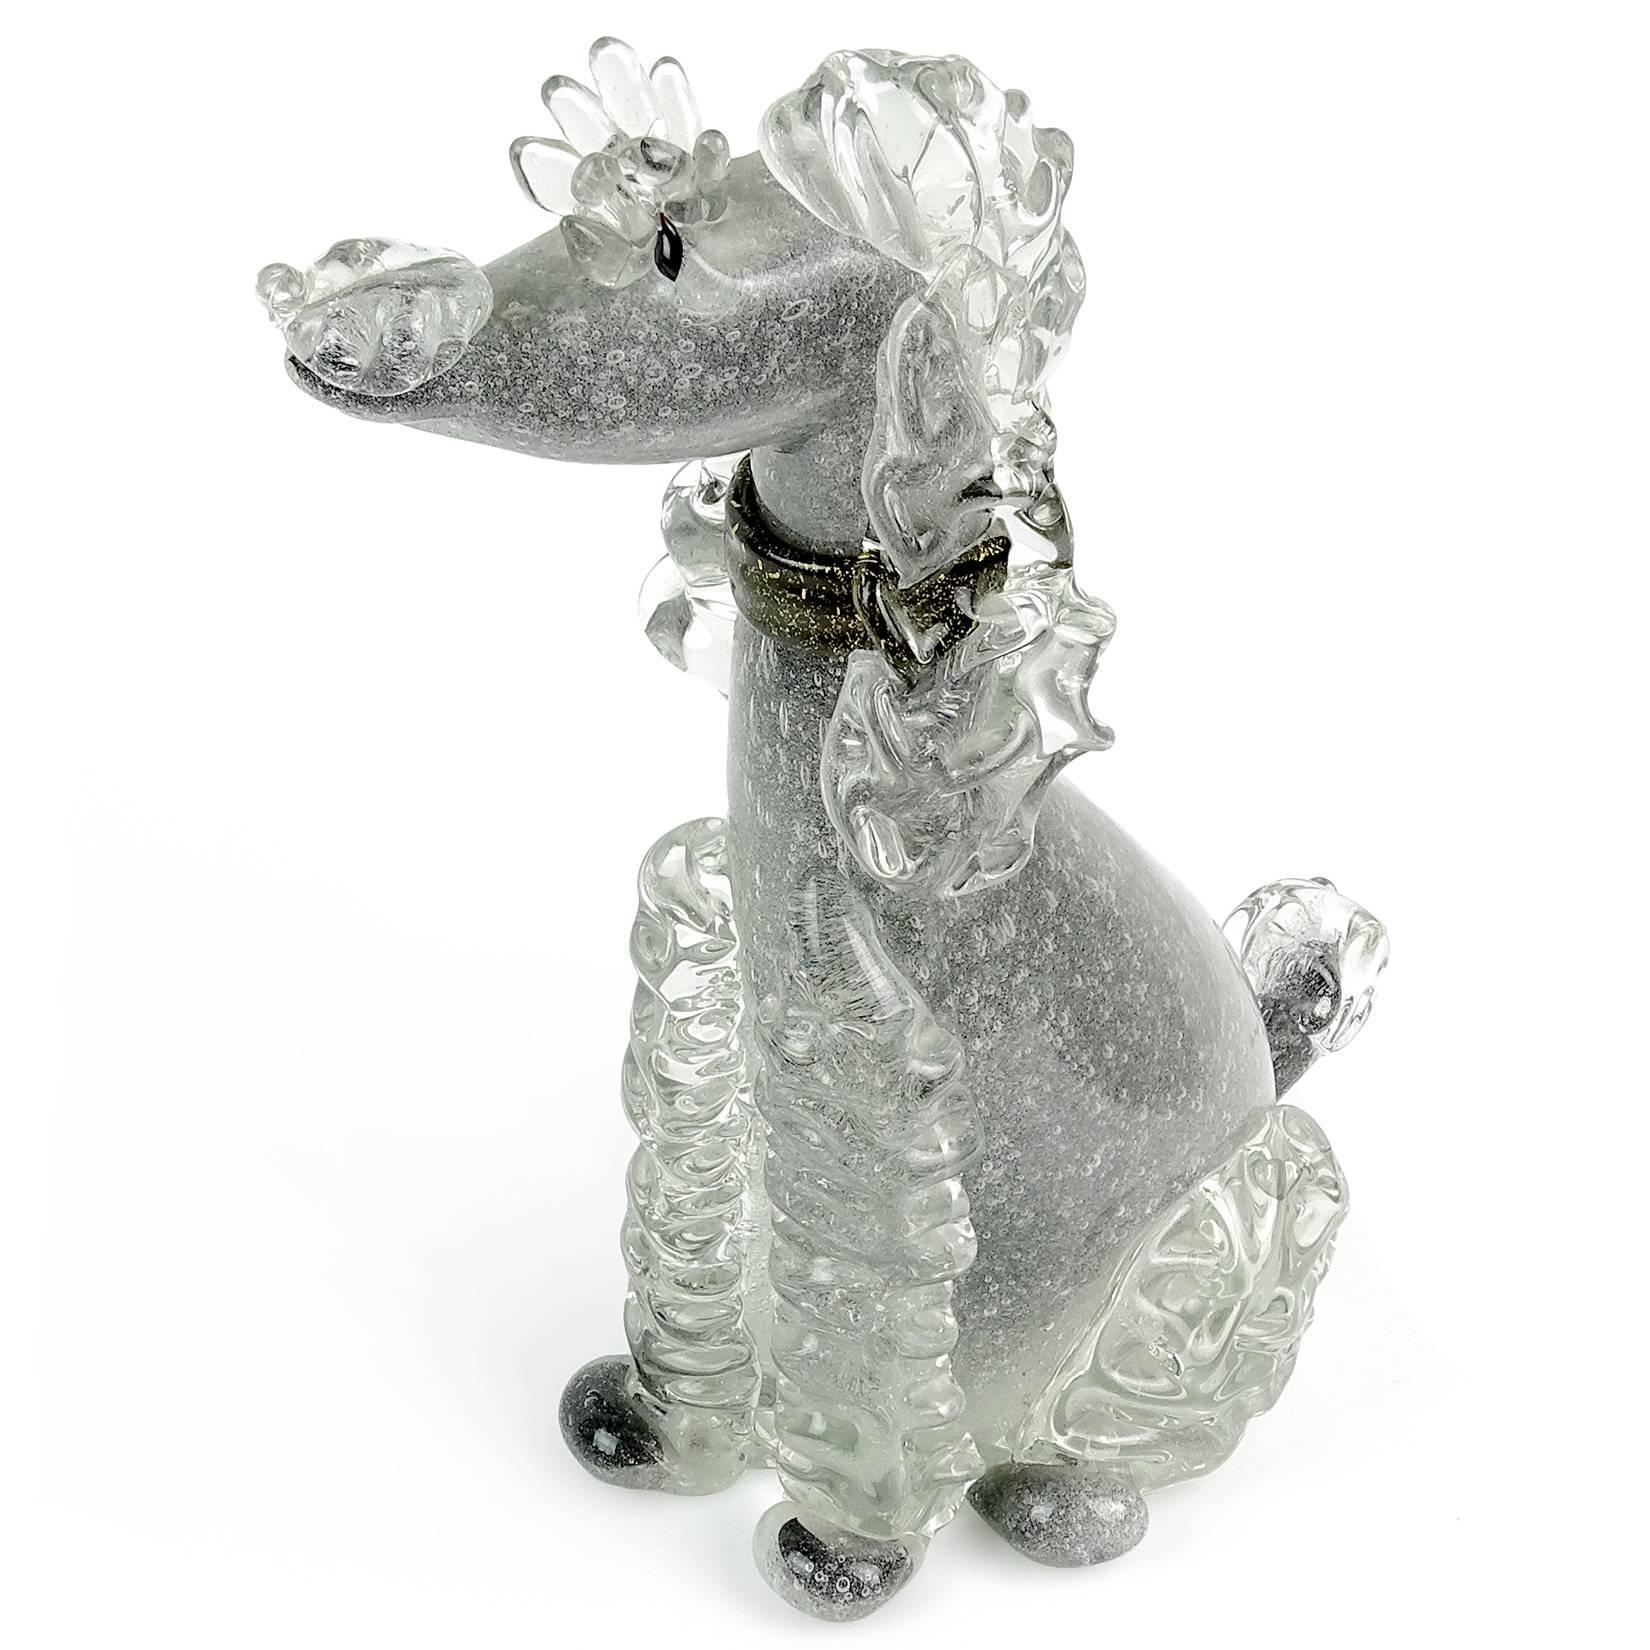 Beautiful and rare Murano handblown Pulegoso bubbles, black and gold Italian art glass poodle puppy dog sculpture. Documented to designer Alfredo Barbini, circa 1950s-1960s and published in his catalog. Highly detailed, even with eyelashes over the